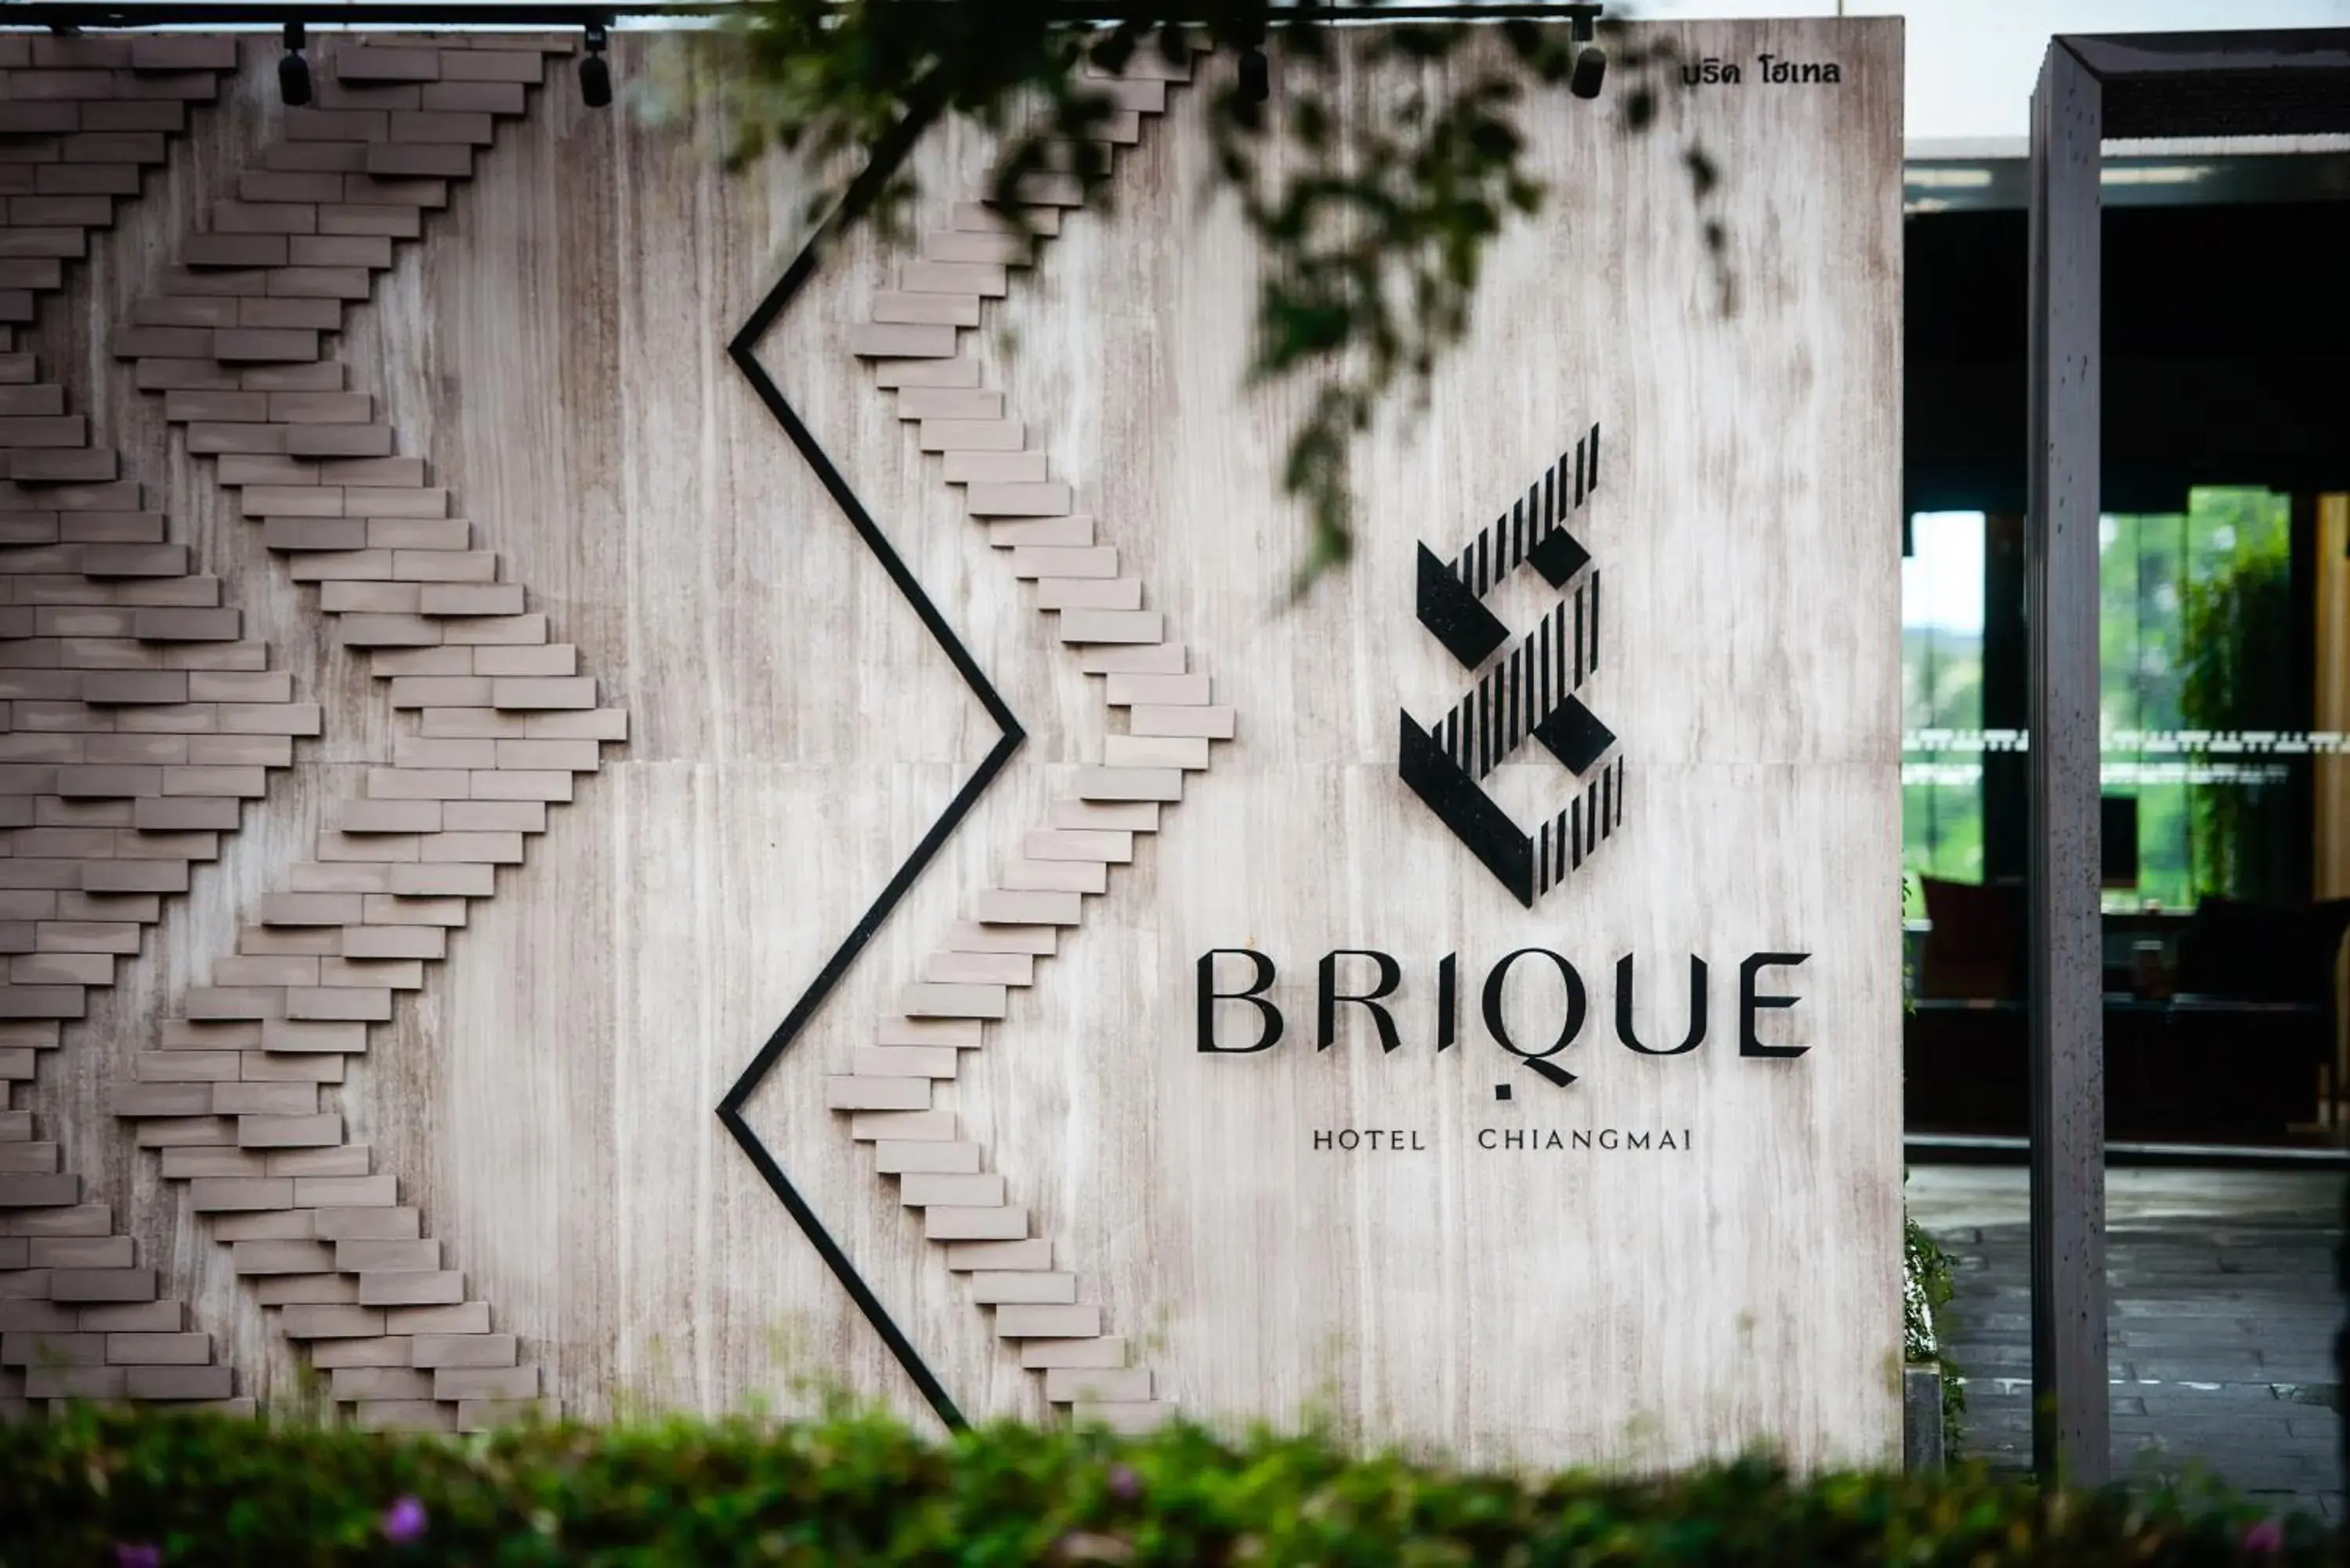 Property logo or sign in Brique Hotel Chiangmai